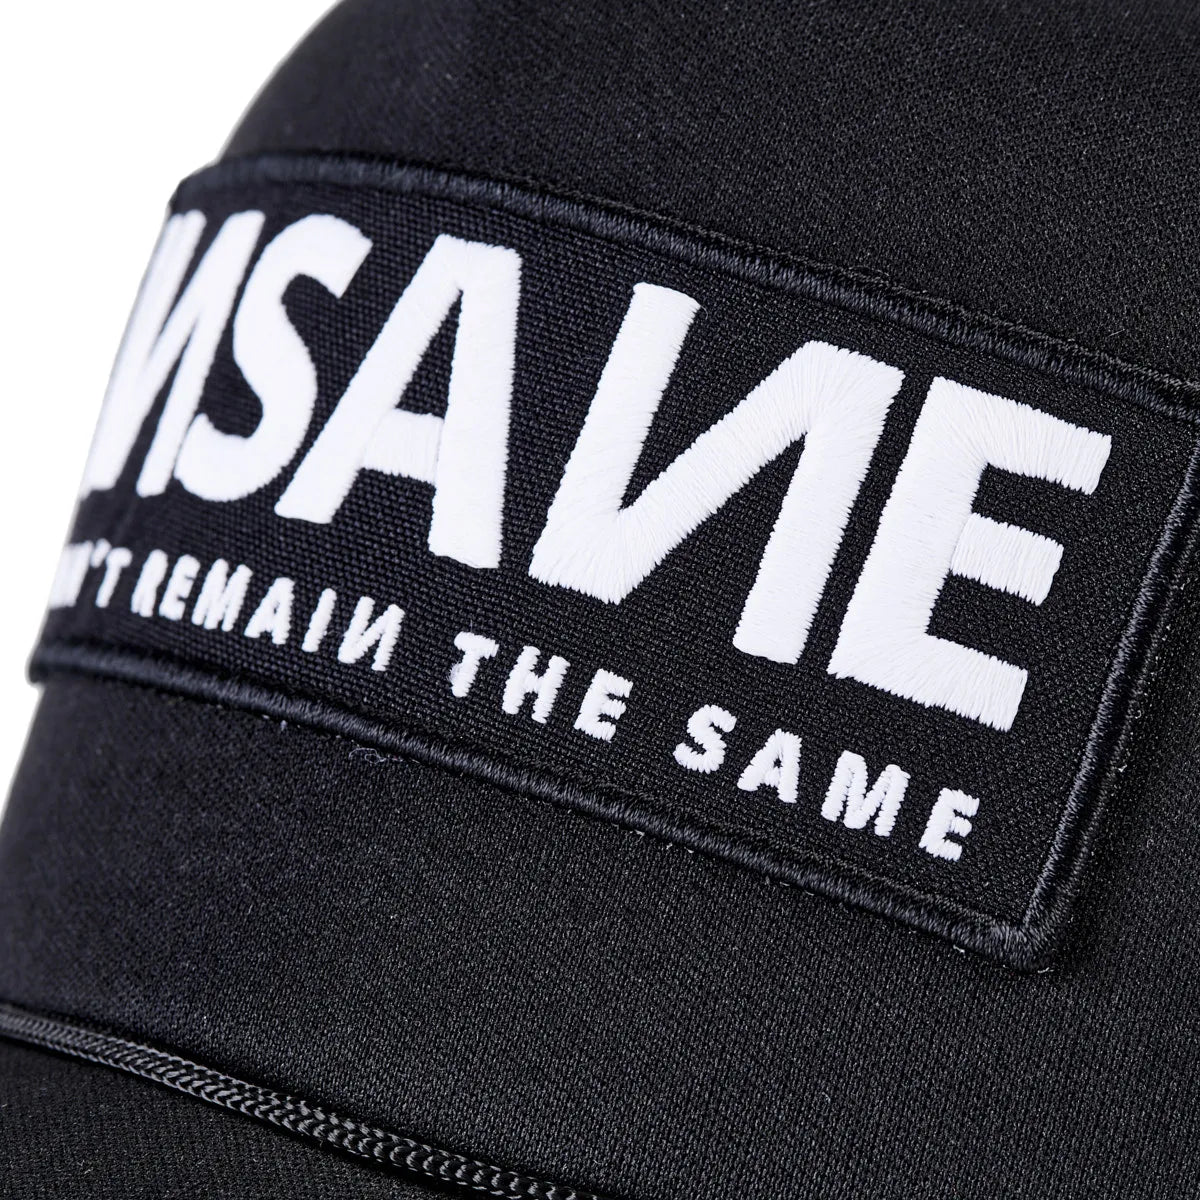 INSANE TRUCKER CAP BLACK WITH PATCH.